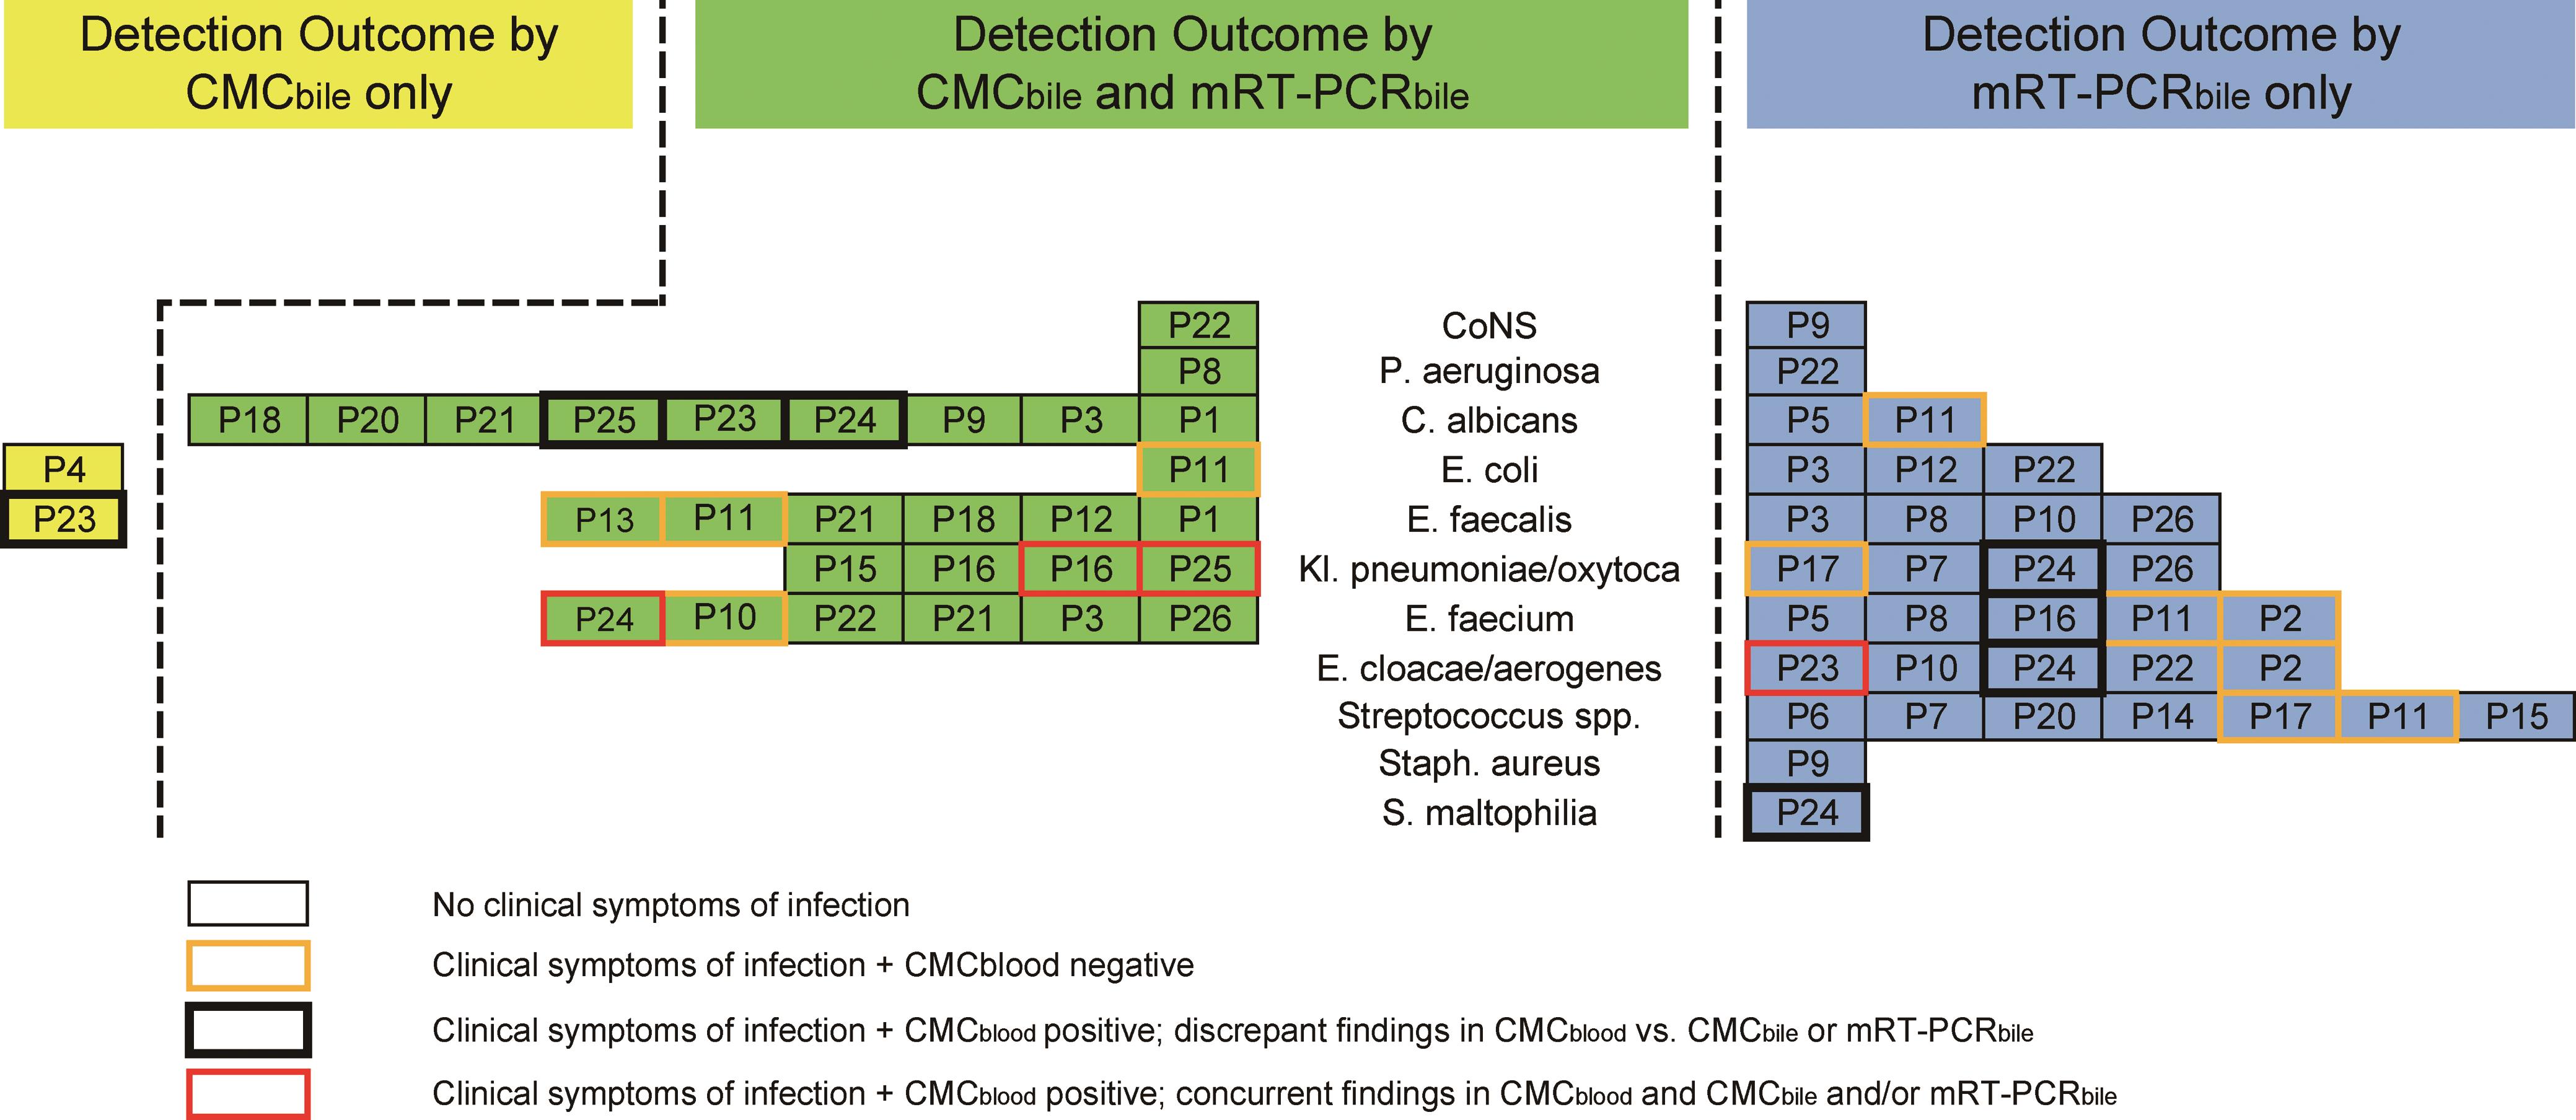 Pathogen detection in bile samples by mRT-PCR and CMC.